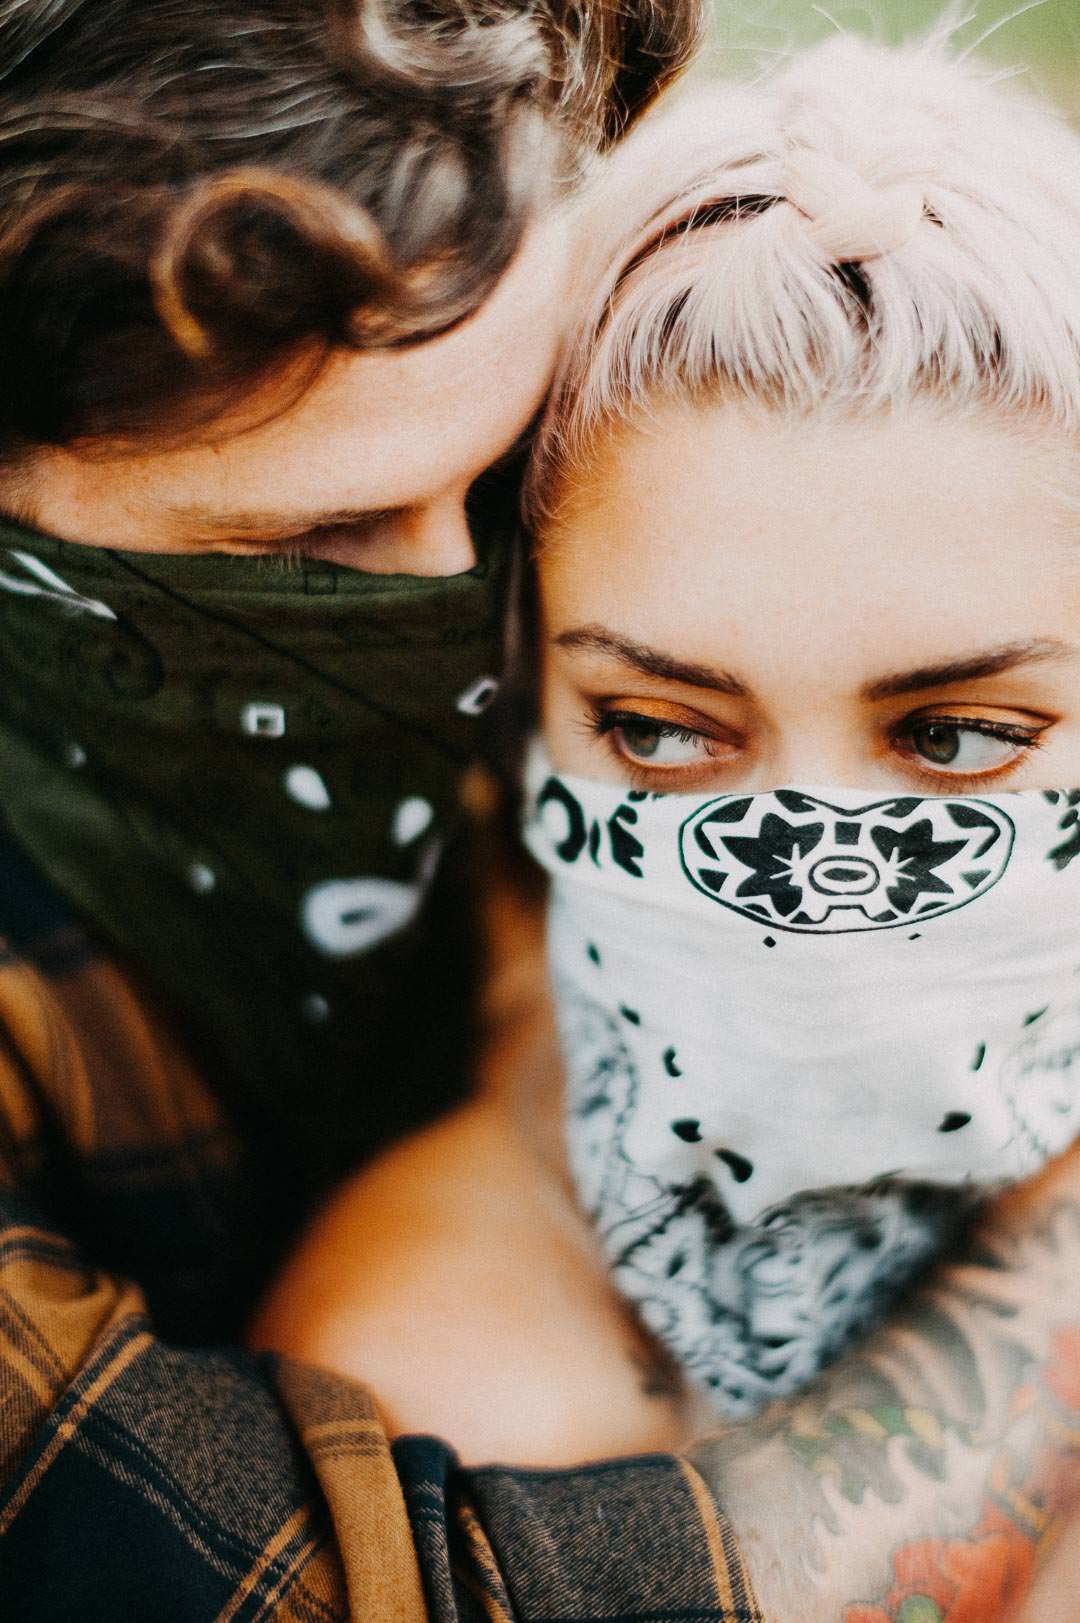 Motorcycle Themed Couple Photos